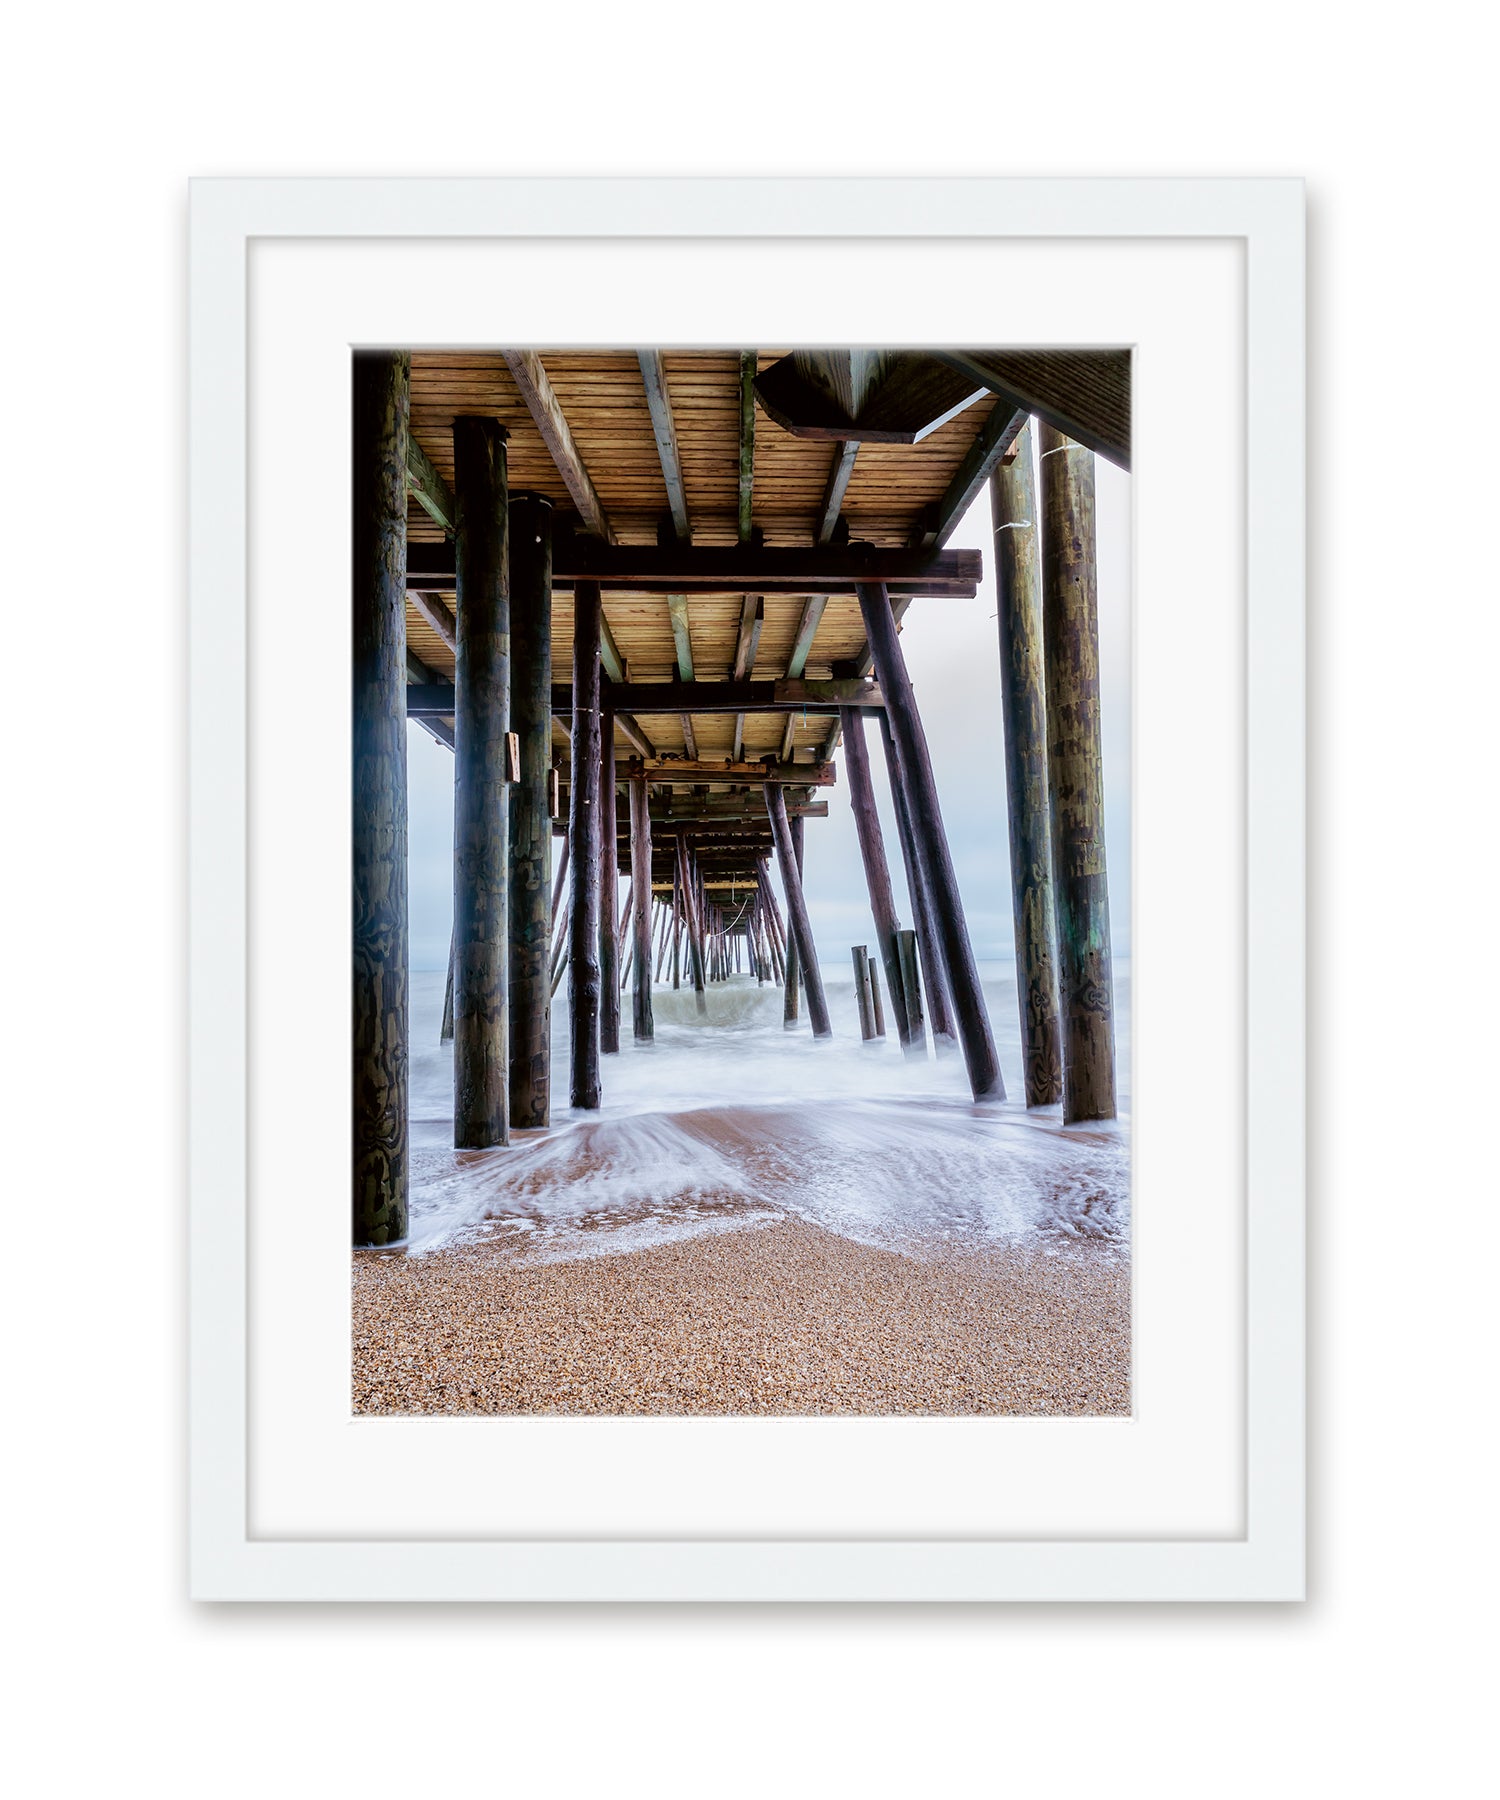 outer banks, avalon pier photograph art print by Wright and Roam, white wood frame